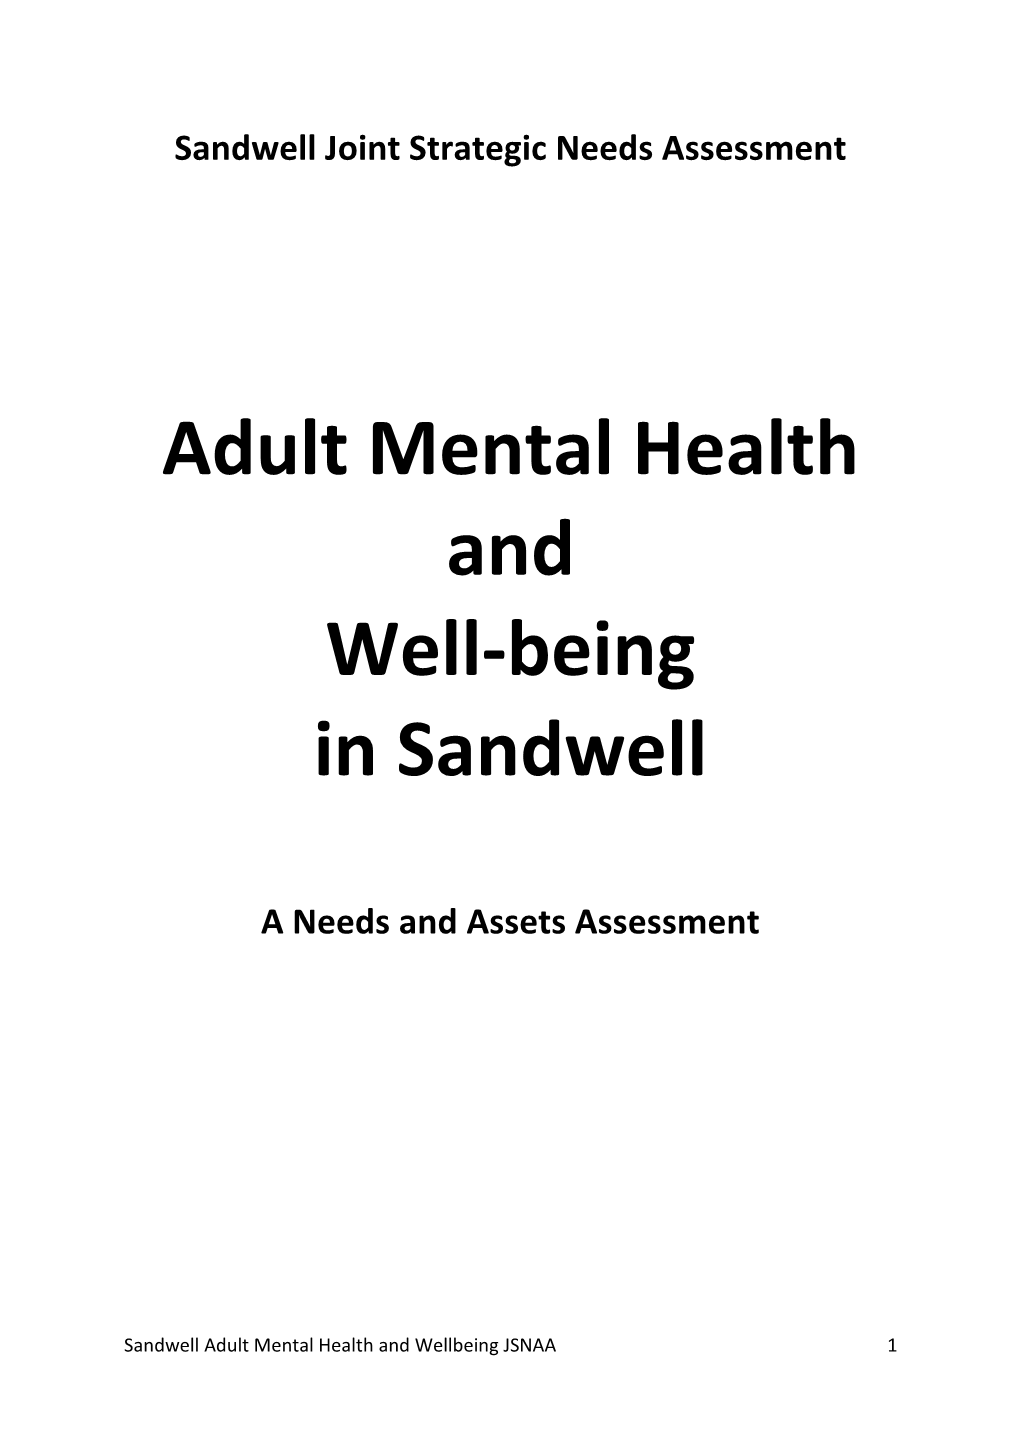 Adult Mental Health and Well-Being in Sandwell